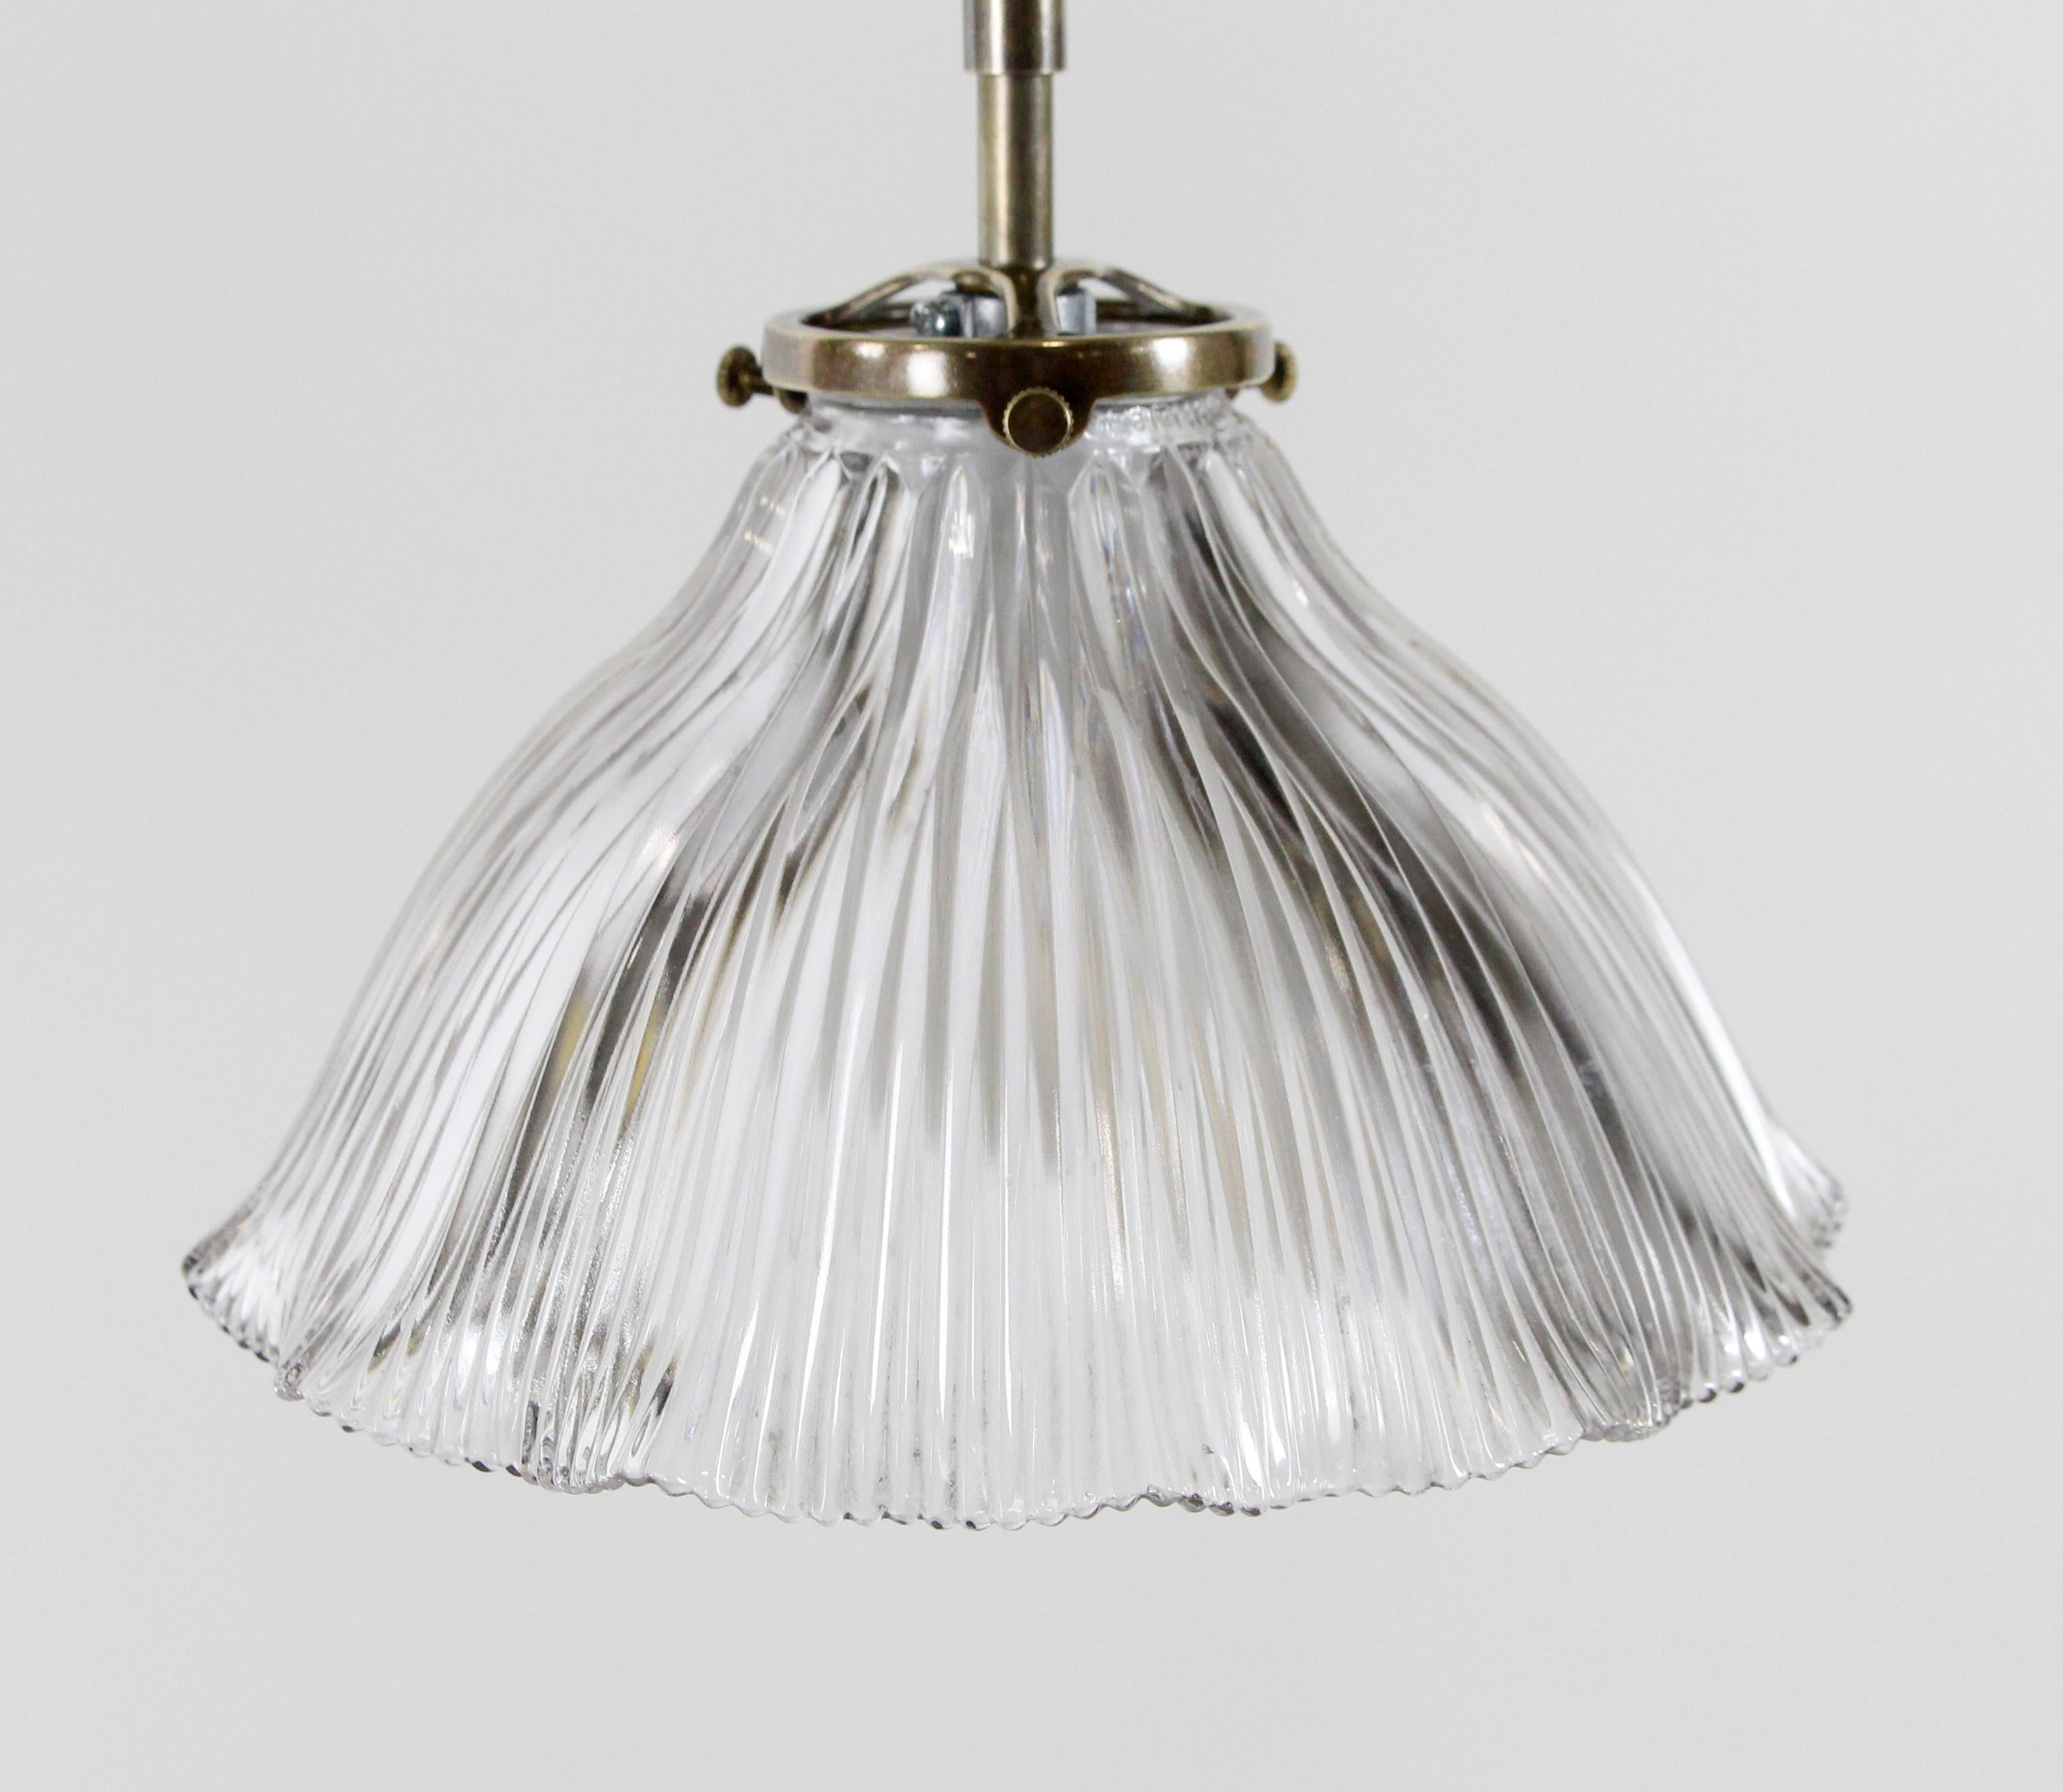 North American Modern Double Brass Prism Holophane Ruffled Shade Pendant Light